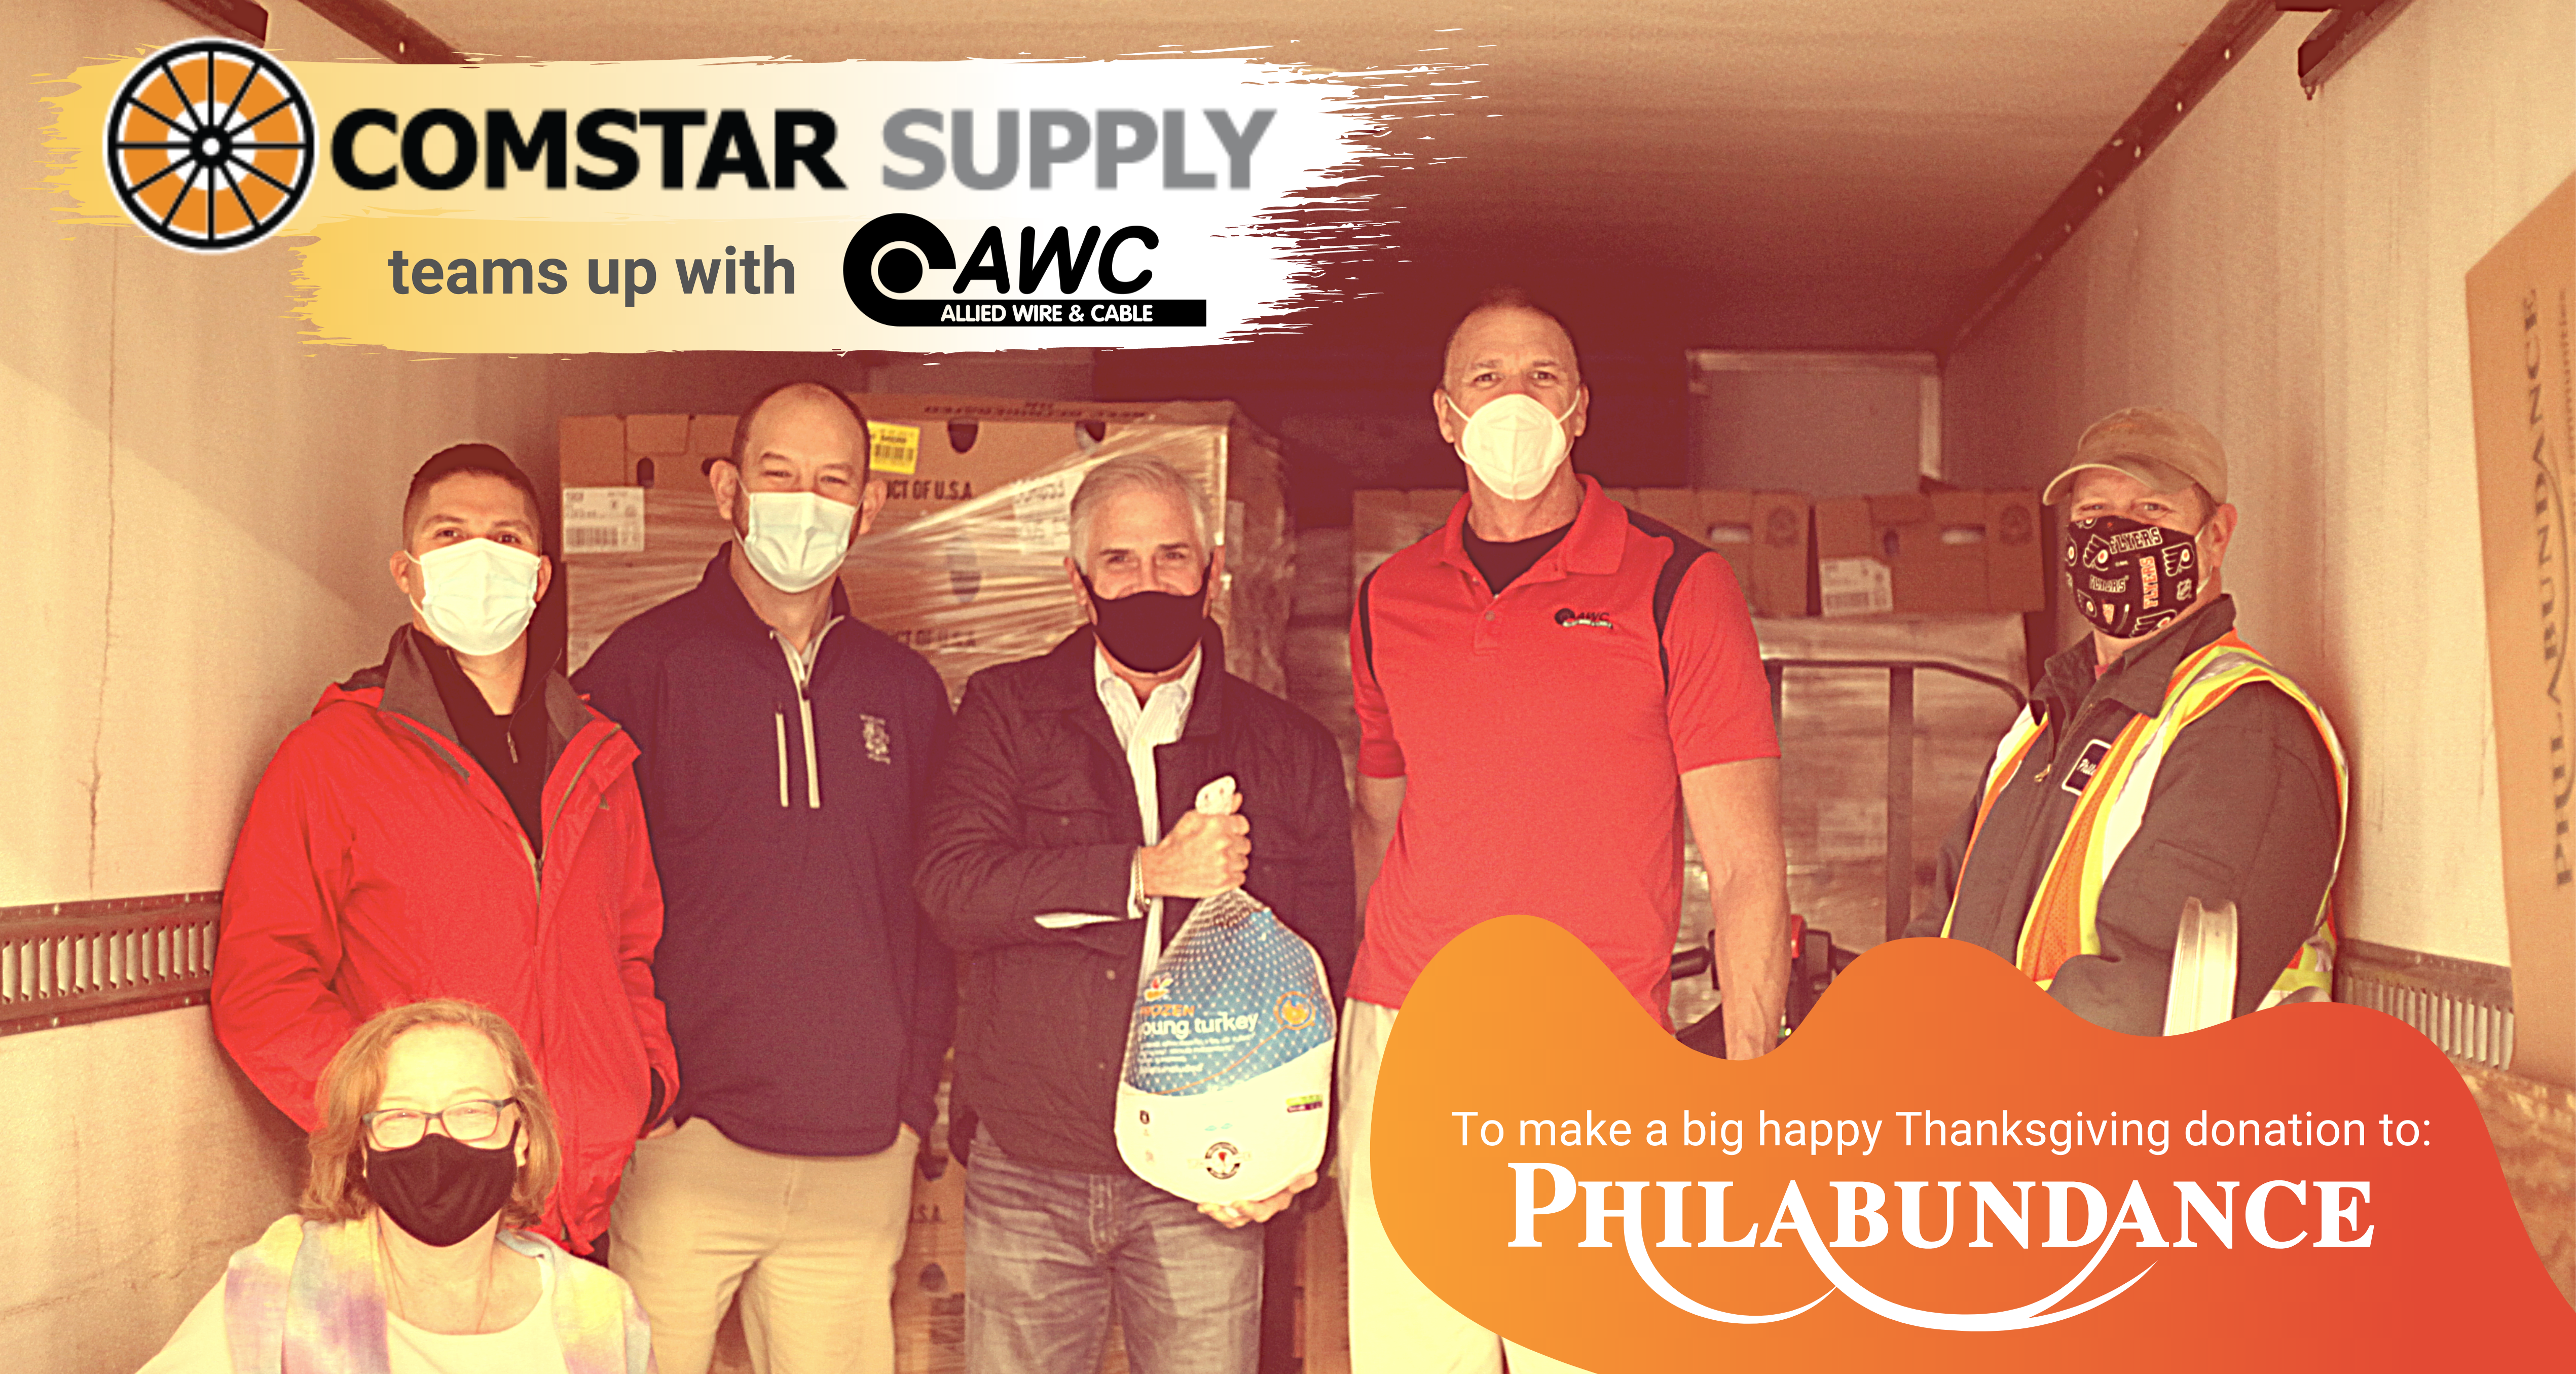 AWC teams up with Comstar Supply to donate to Philabundance